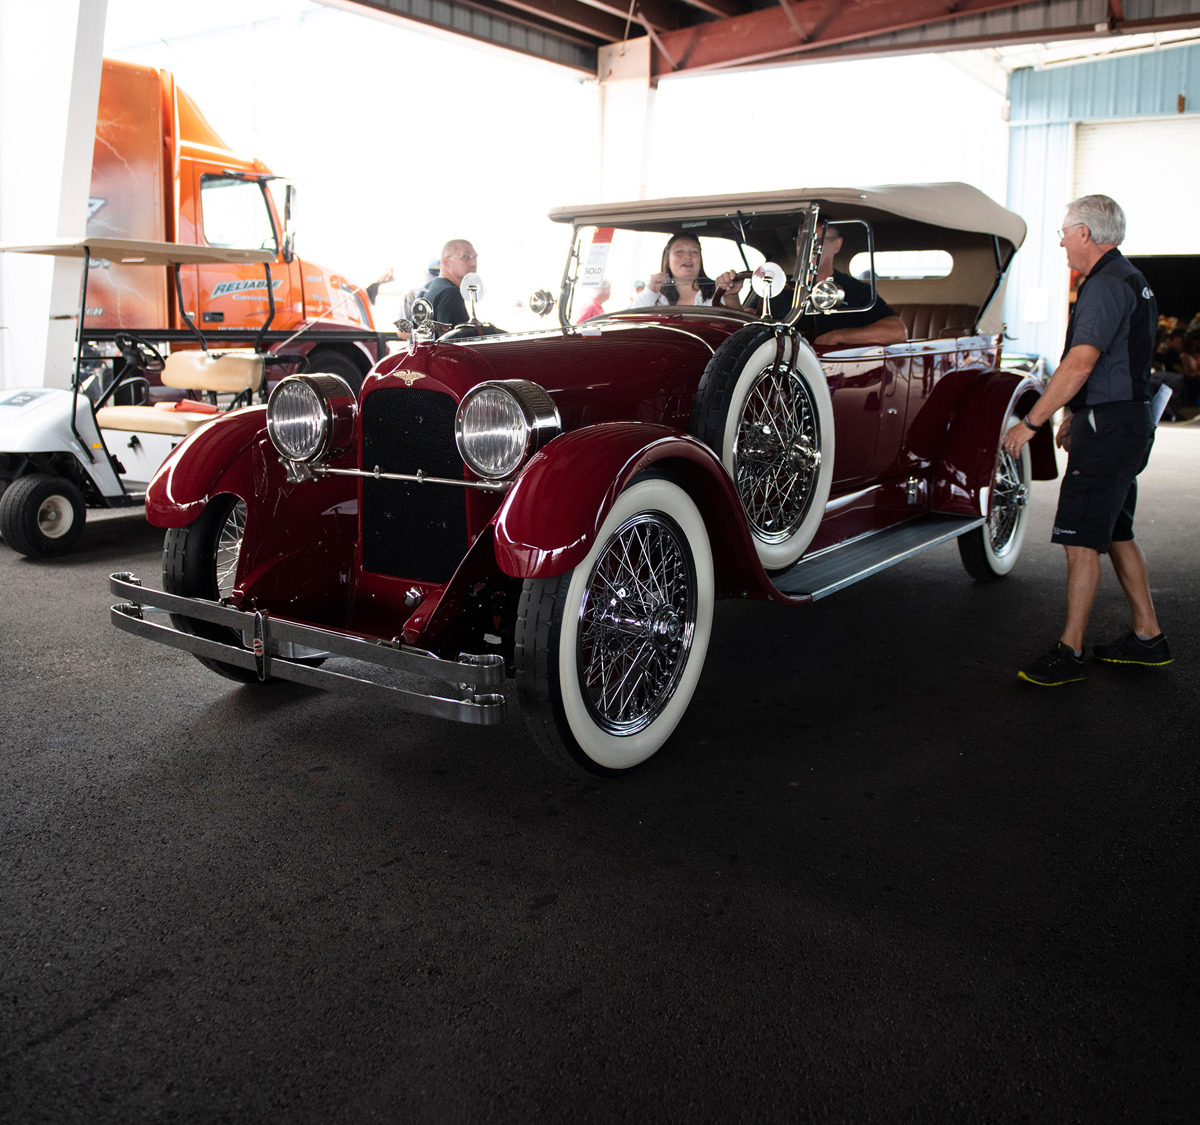 1923 Duesenberg Model A Sport Touring by Rubay offered at RM Sotheby’s Auburn Fall live auction 2019